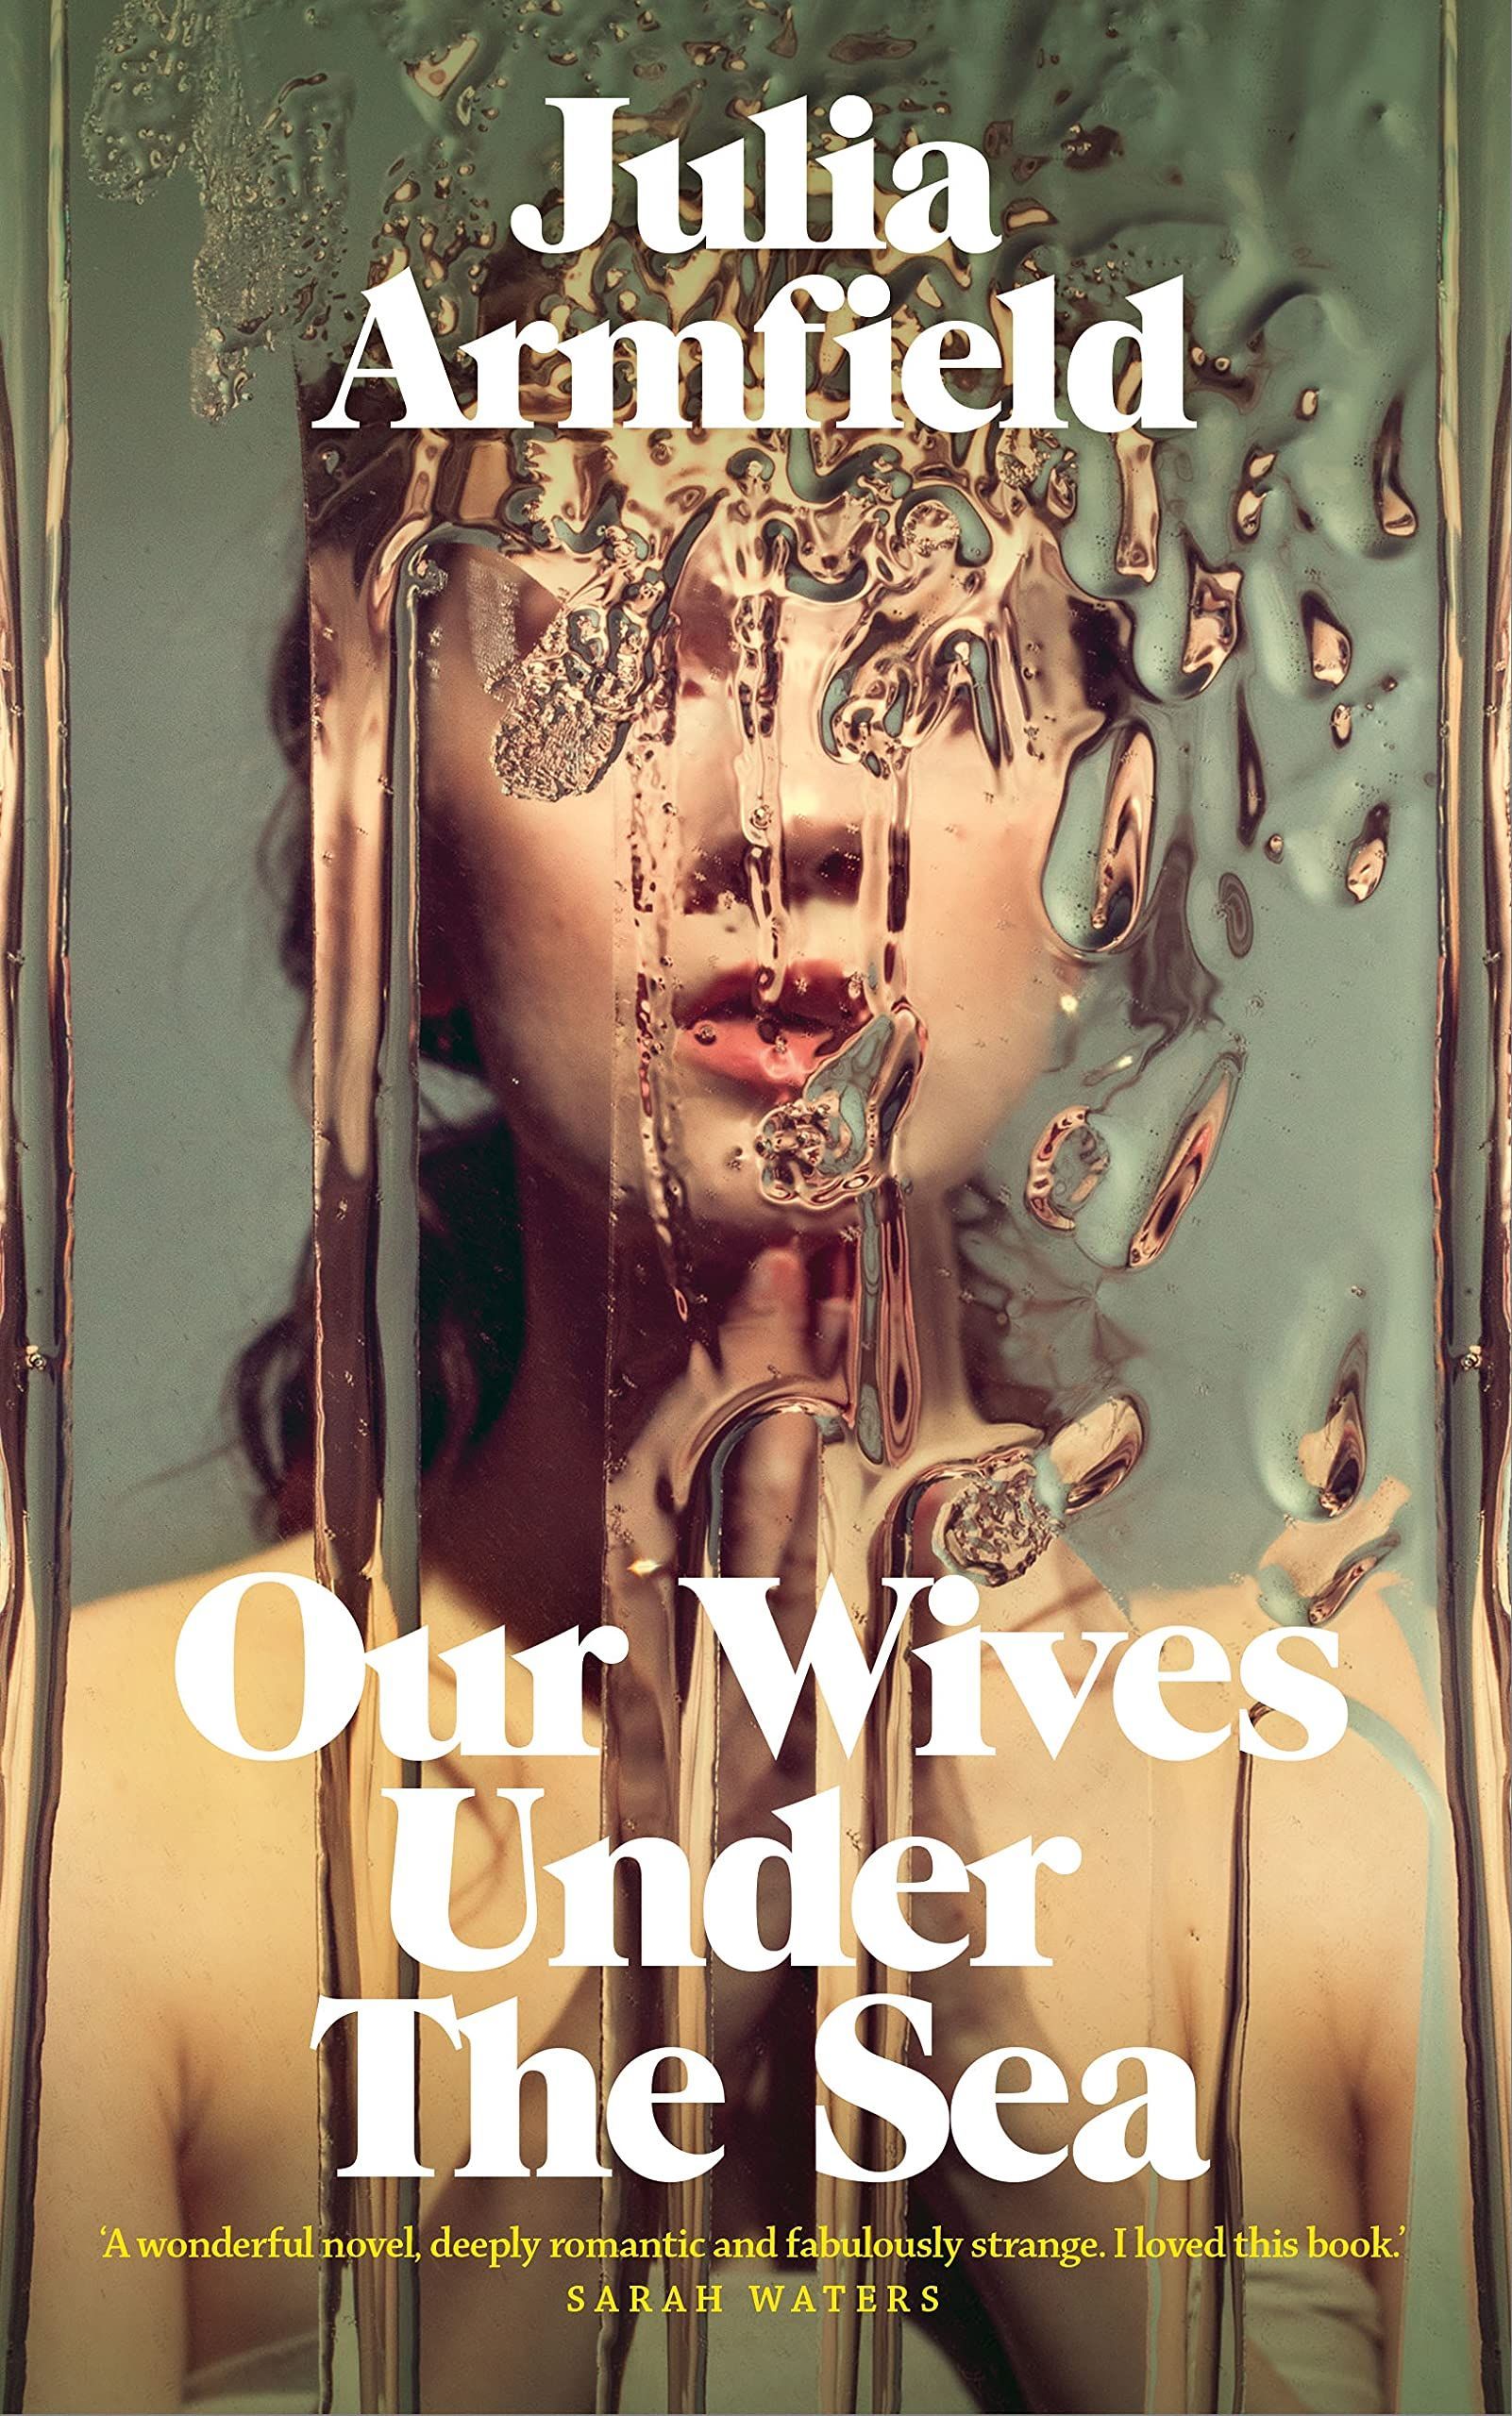 A Leaky Manual on Living with Uncertainty: On Julia Armfield’s “Our Wives Under the Sea”